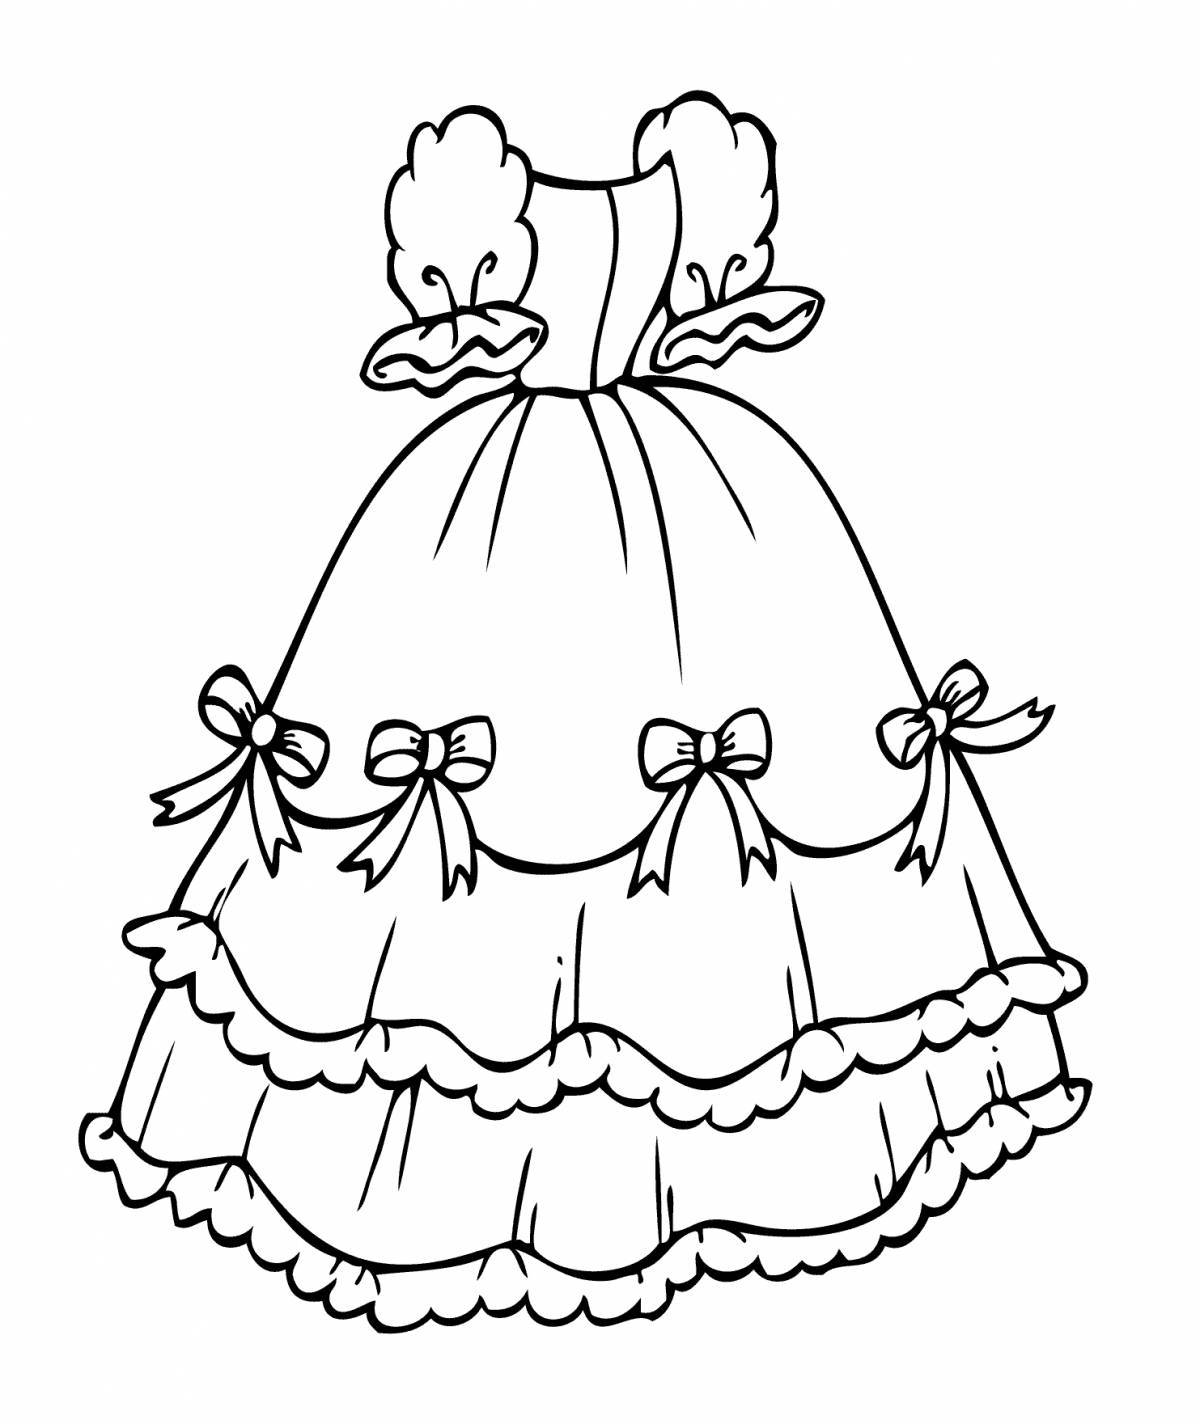 Coloring dress for children